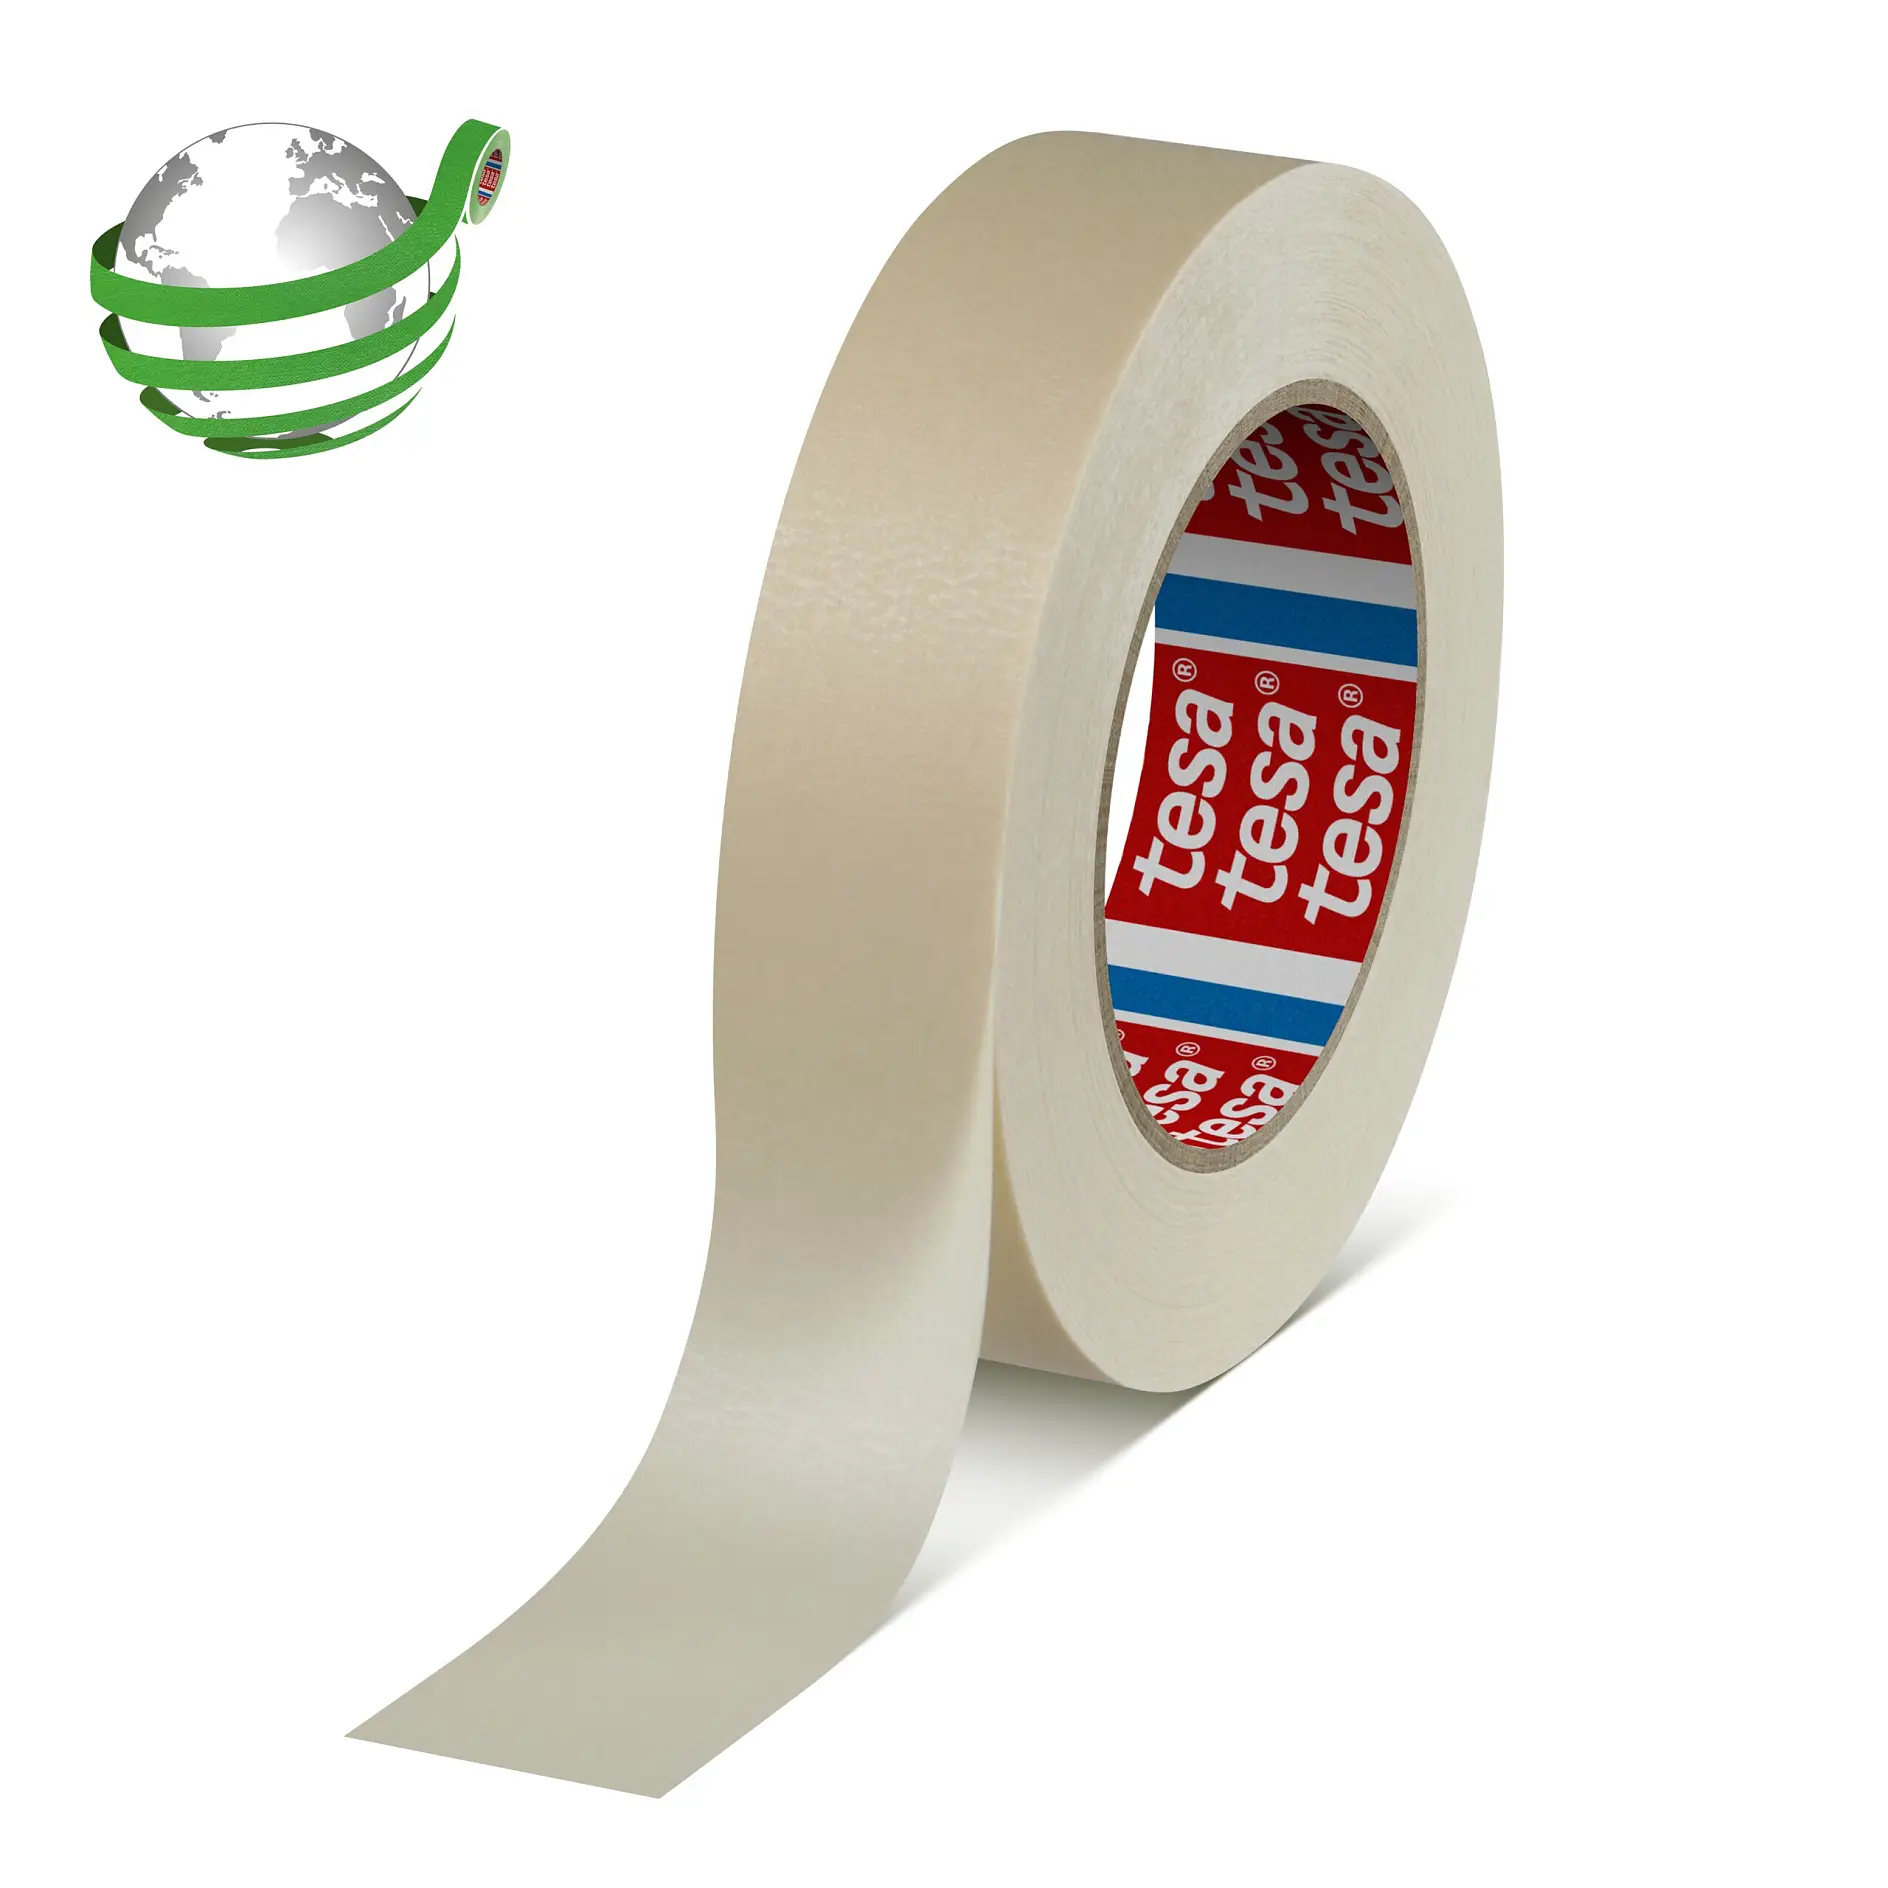 tesa-4330-paper-masking-tape-oven-drying-chamois-043300002000-pr-with-marker